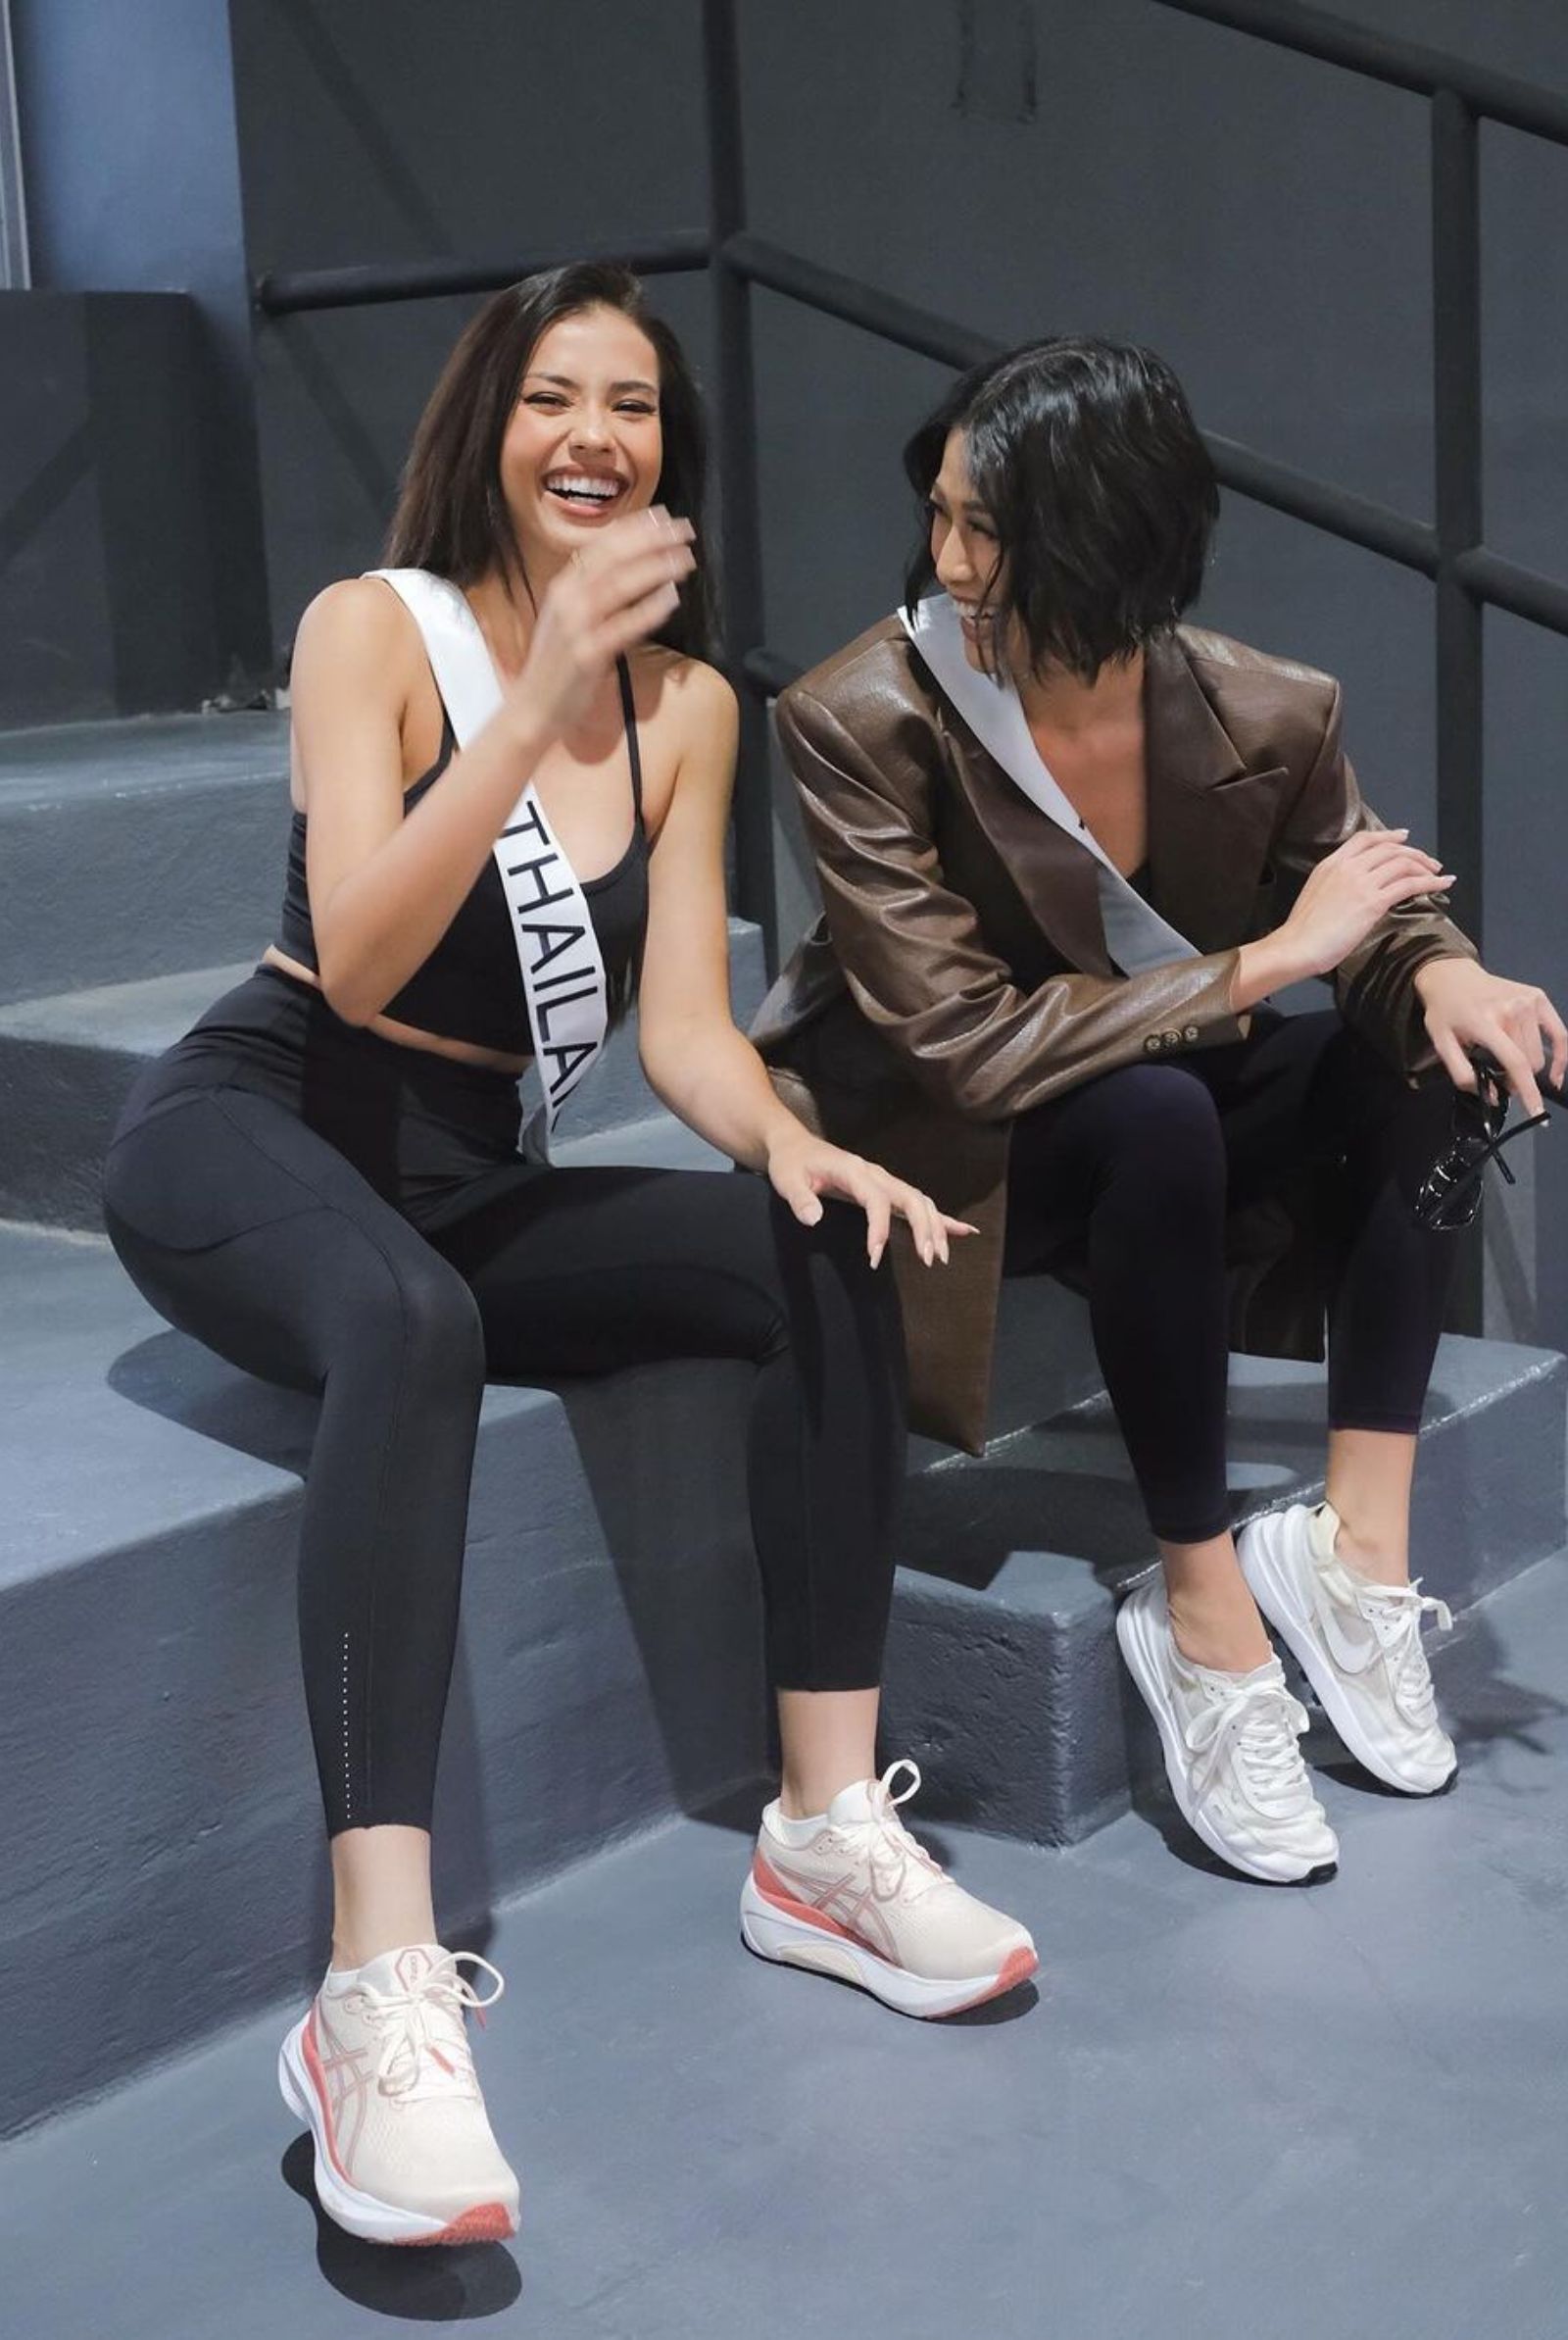 Miss Philippines and Miss Thailand training together